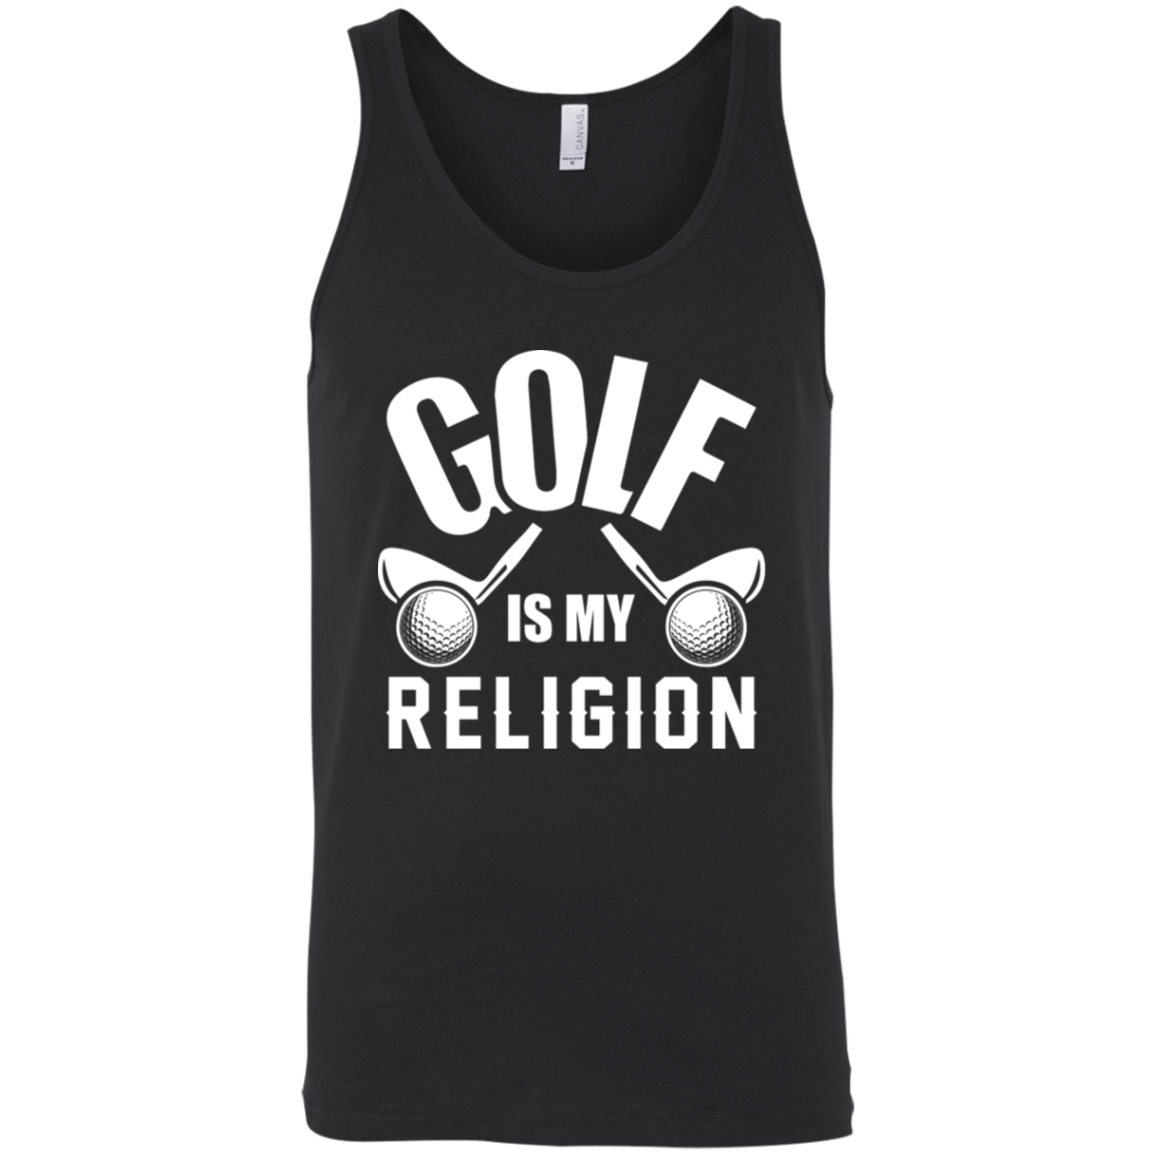 Golf Is my Religion Tank Top Apparel - The Beer Lodge